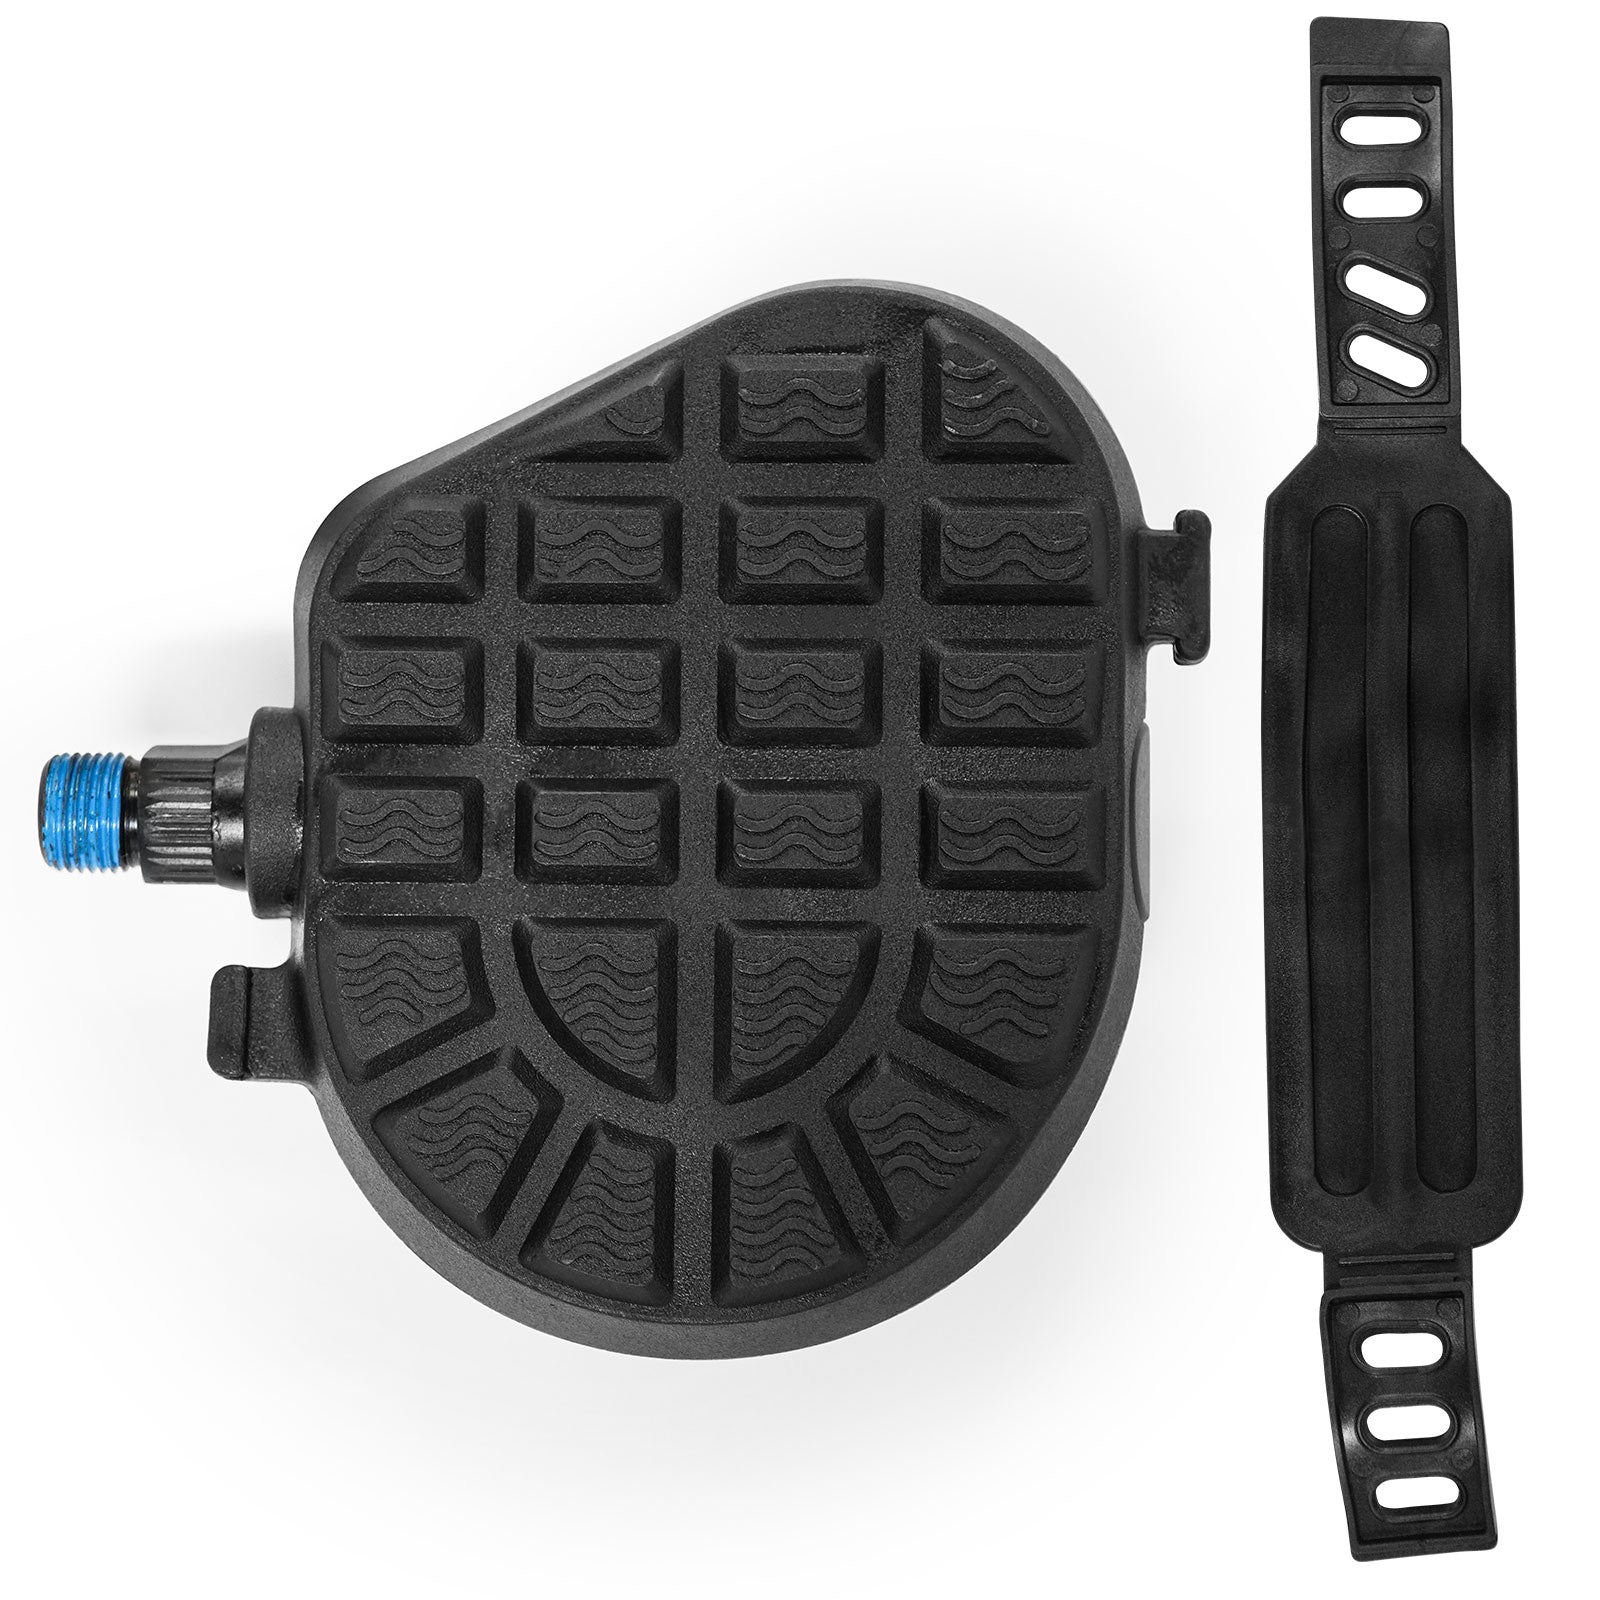 Micyox MX600 Bicycle Pedals with Clips and Straps